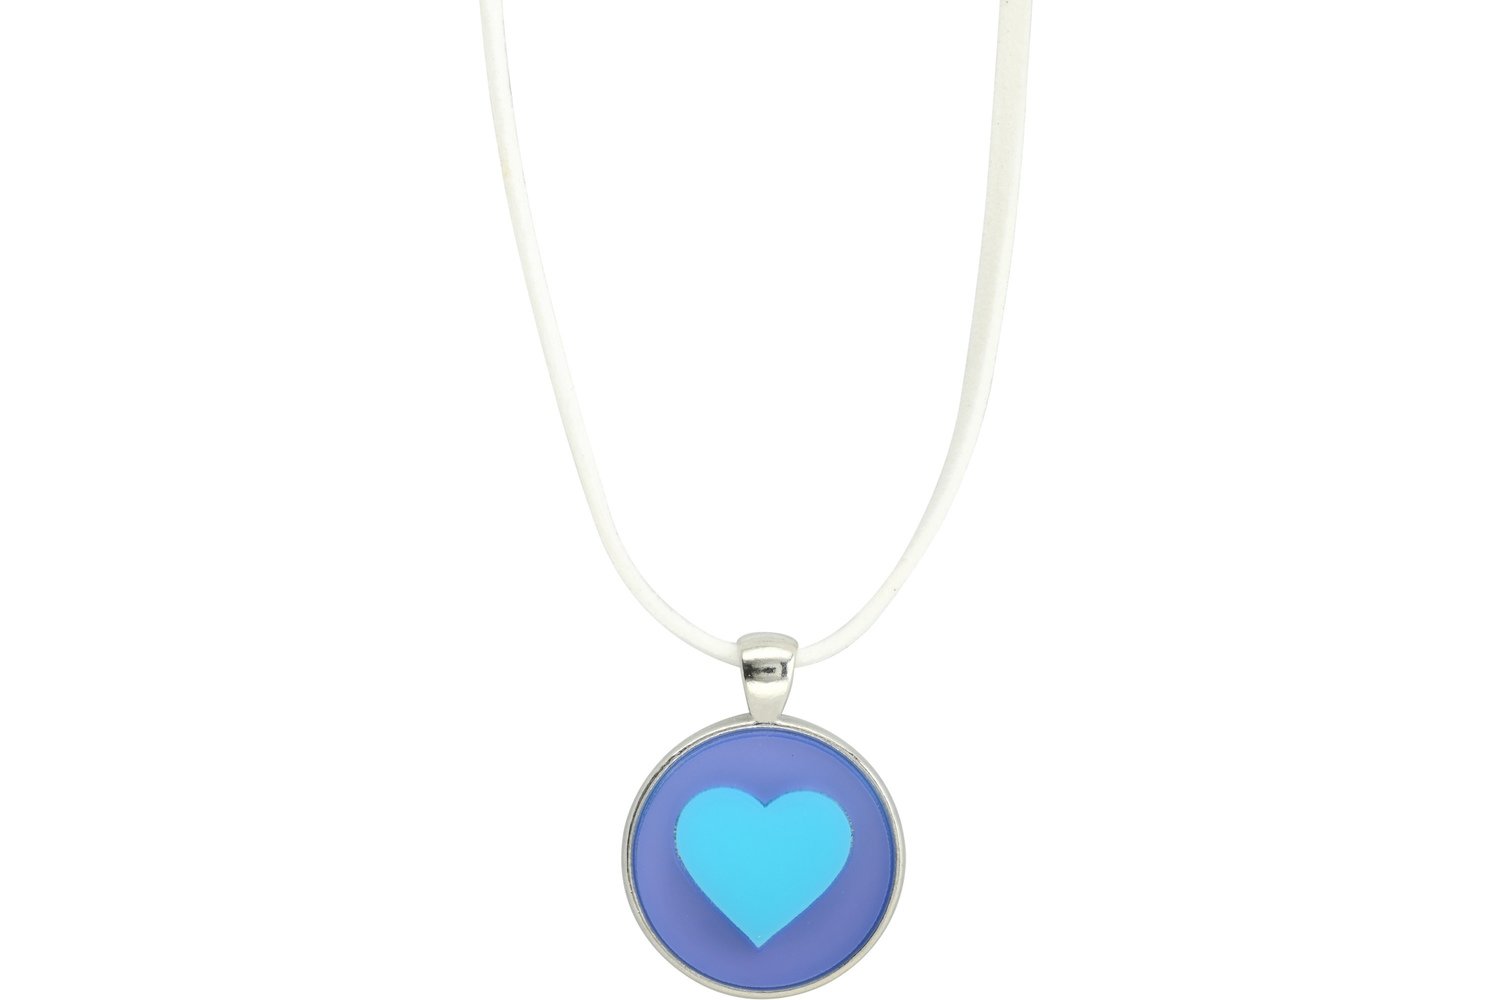 Heart Pendant Intricate Style on Suede Leather Cord Necklace